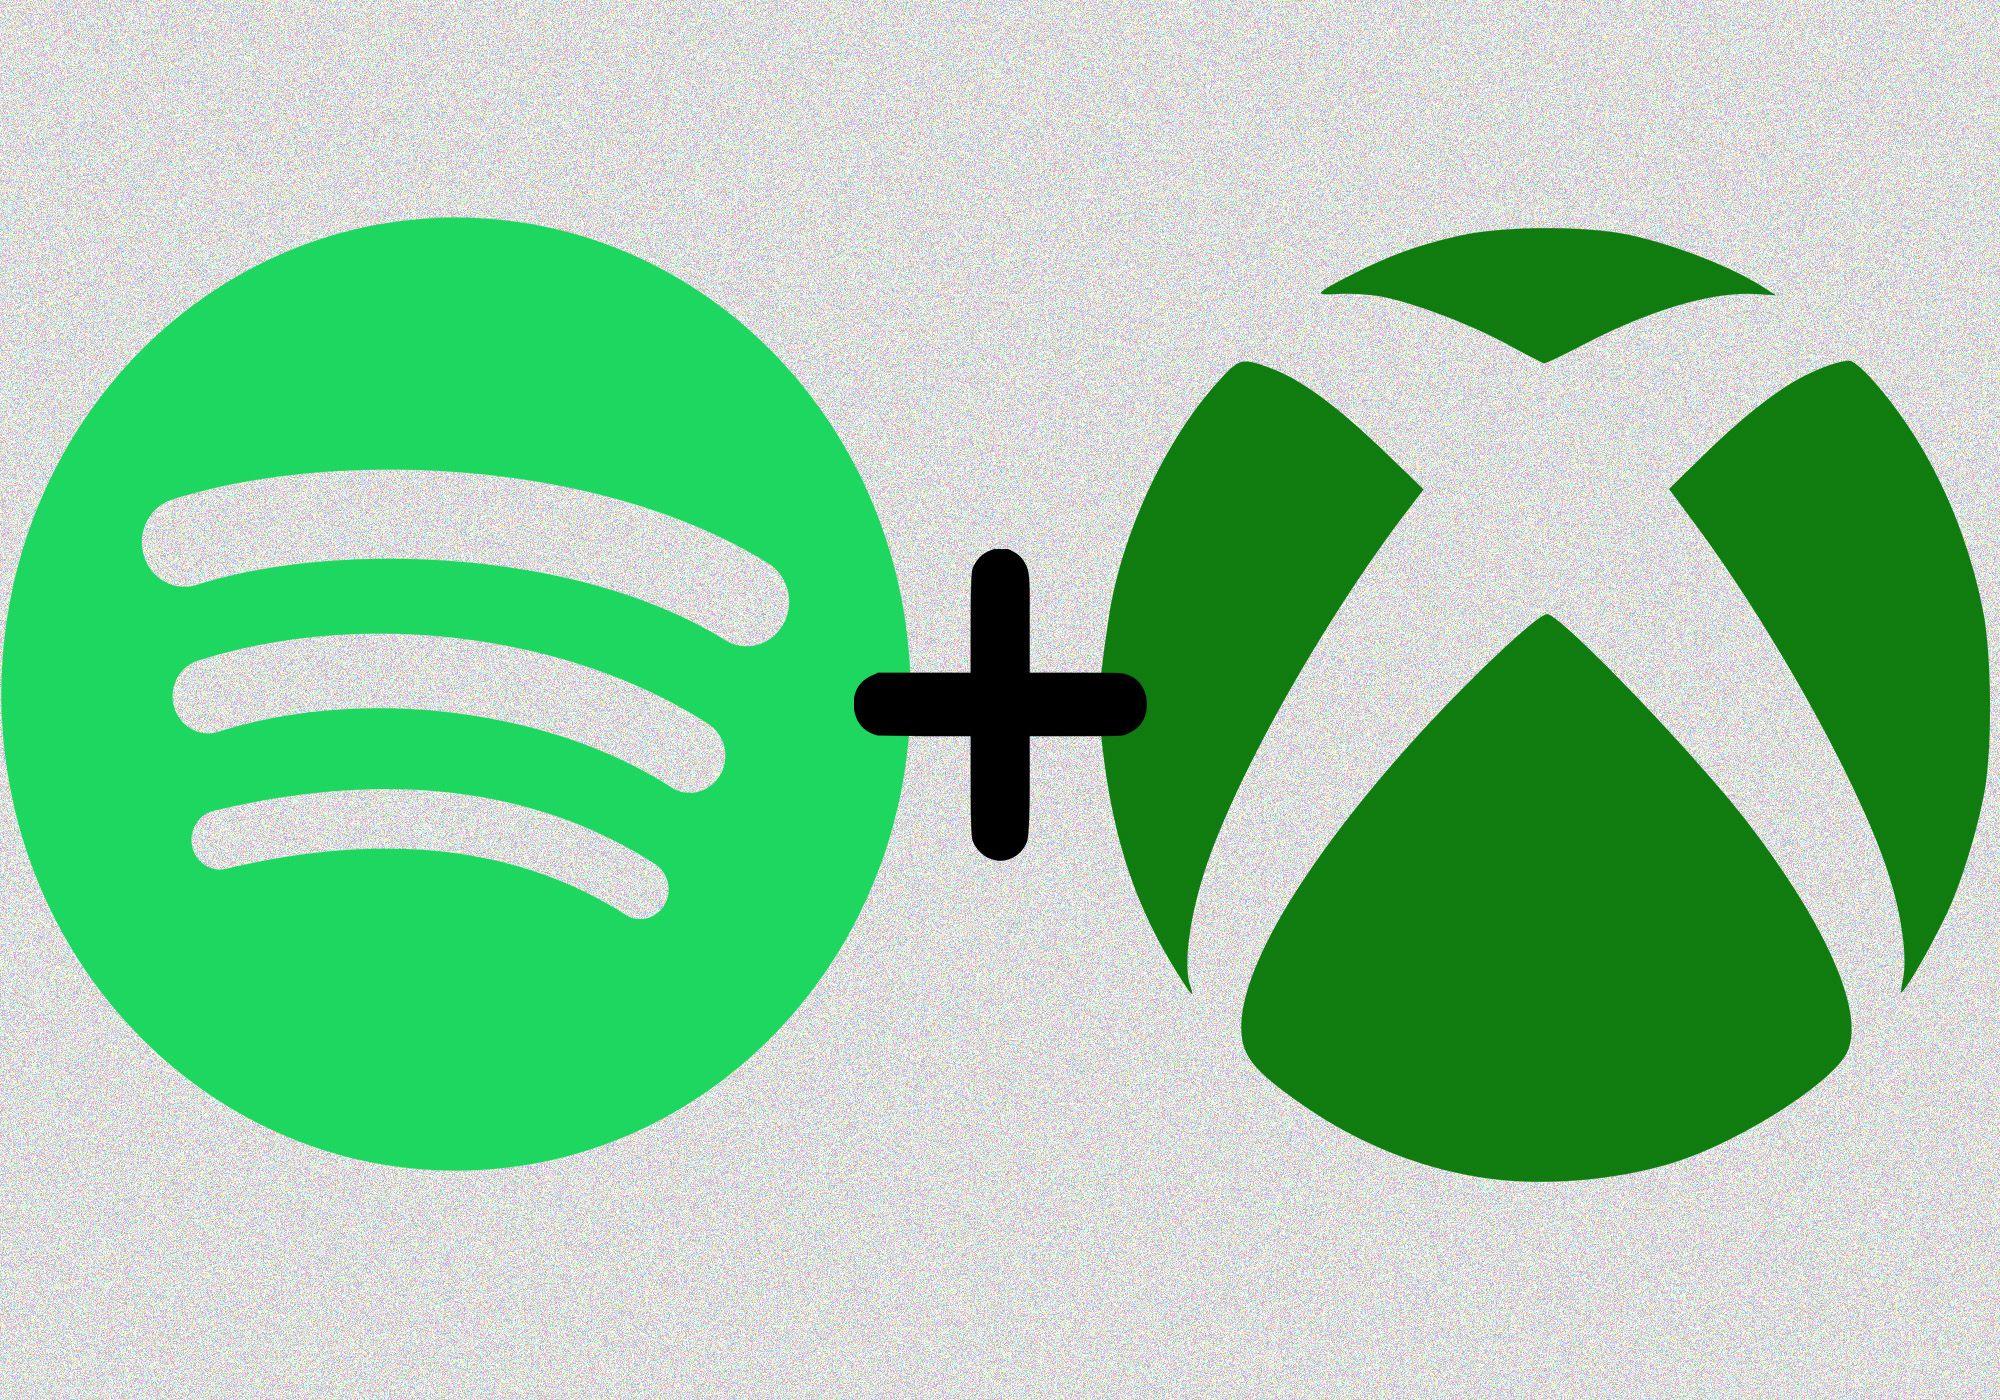 Xbox Looks Like with Green Circle Logo - The evidence is in, Spotify is coming to the Xbox One